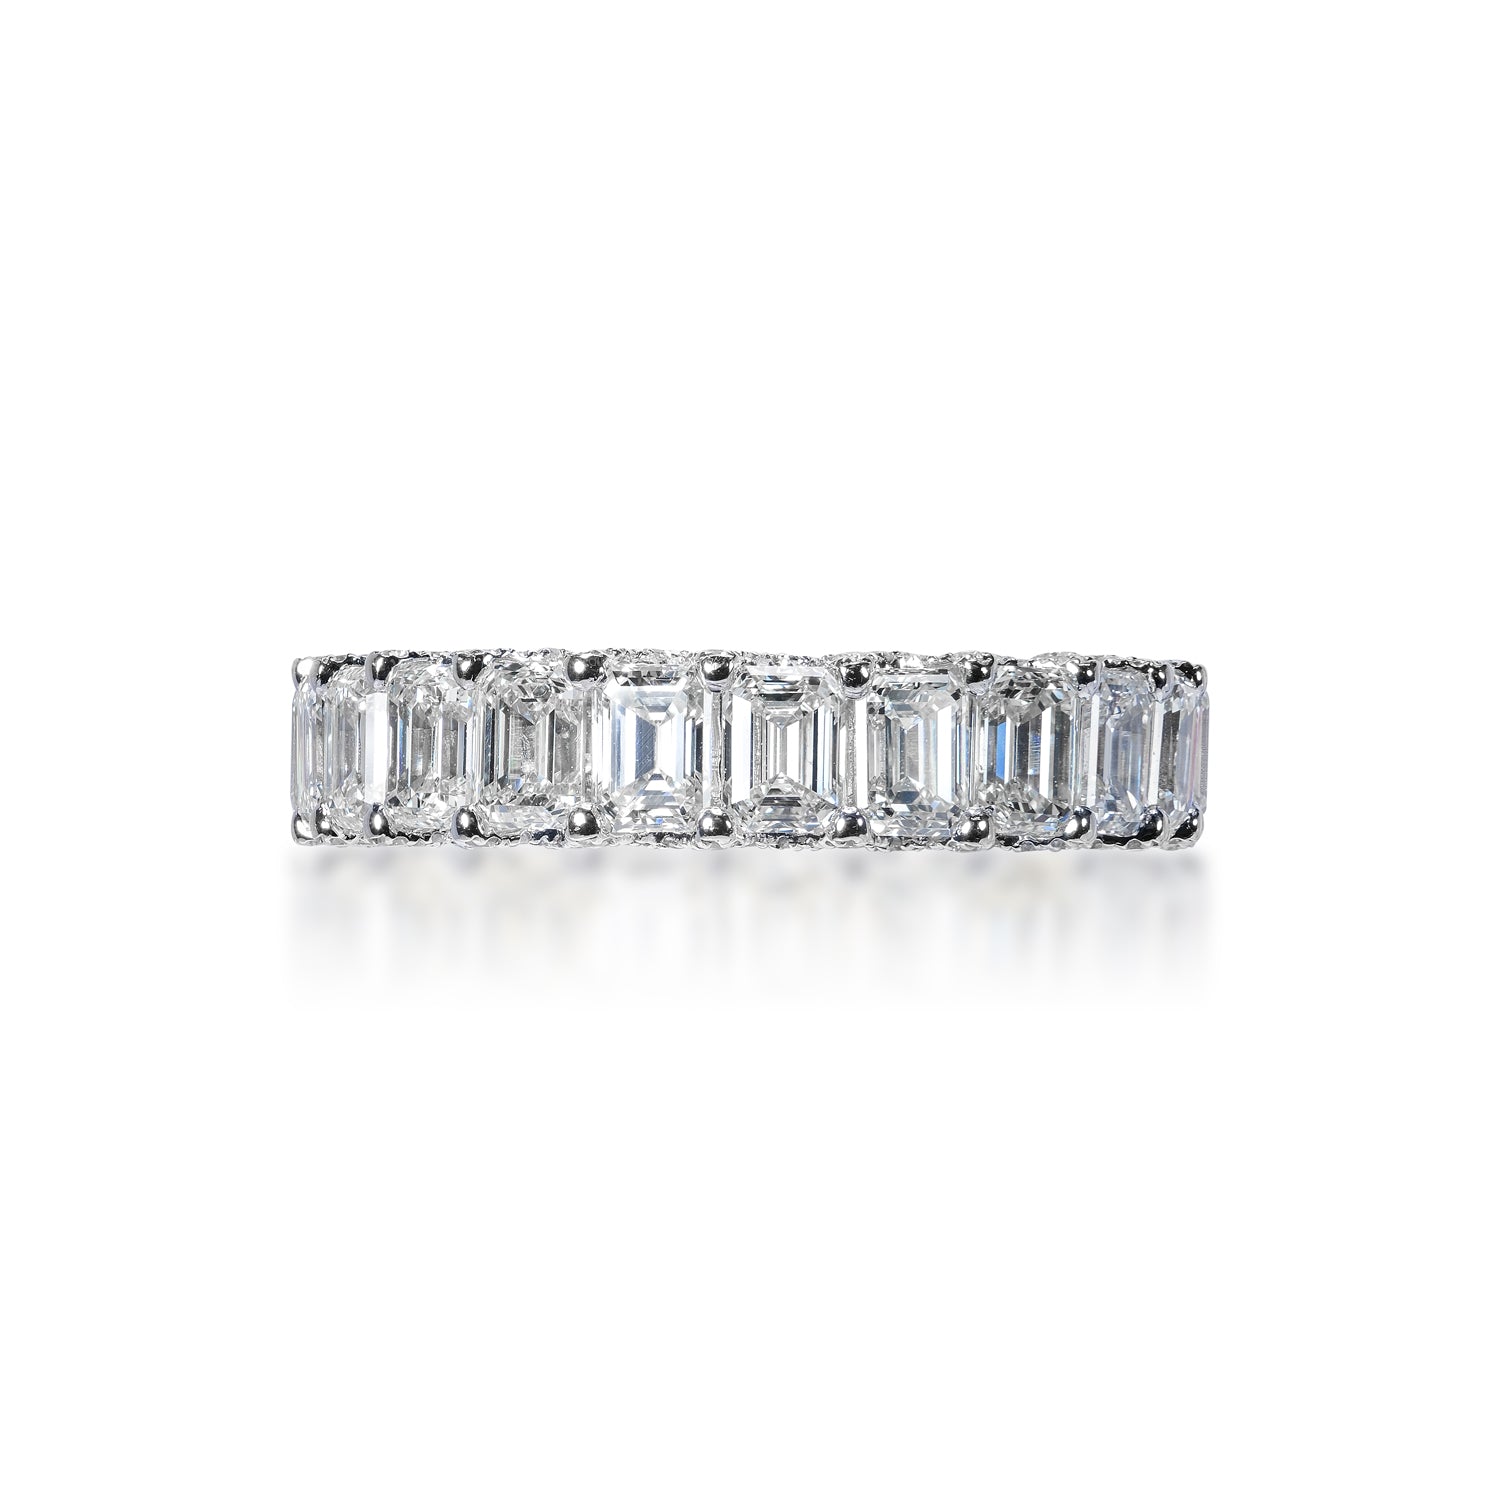 Marie 5 Carat Emerald Cut Diamond Eternity Band  in 14k White Gold Shared Prong Front View